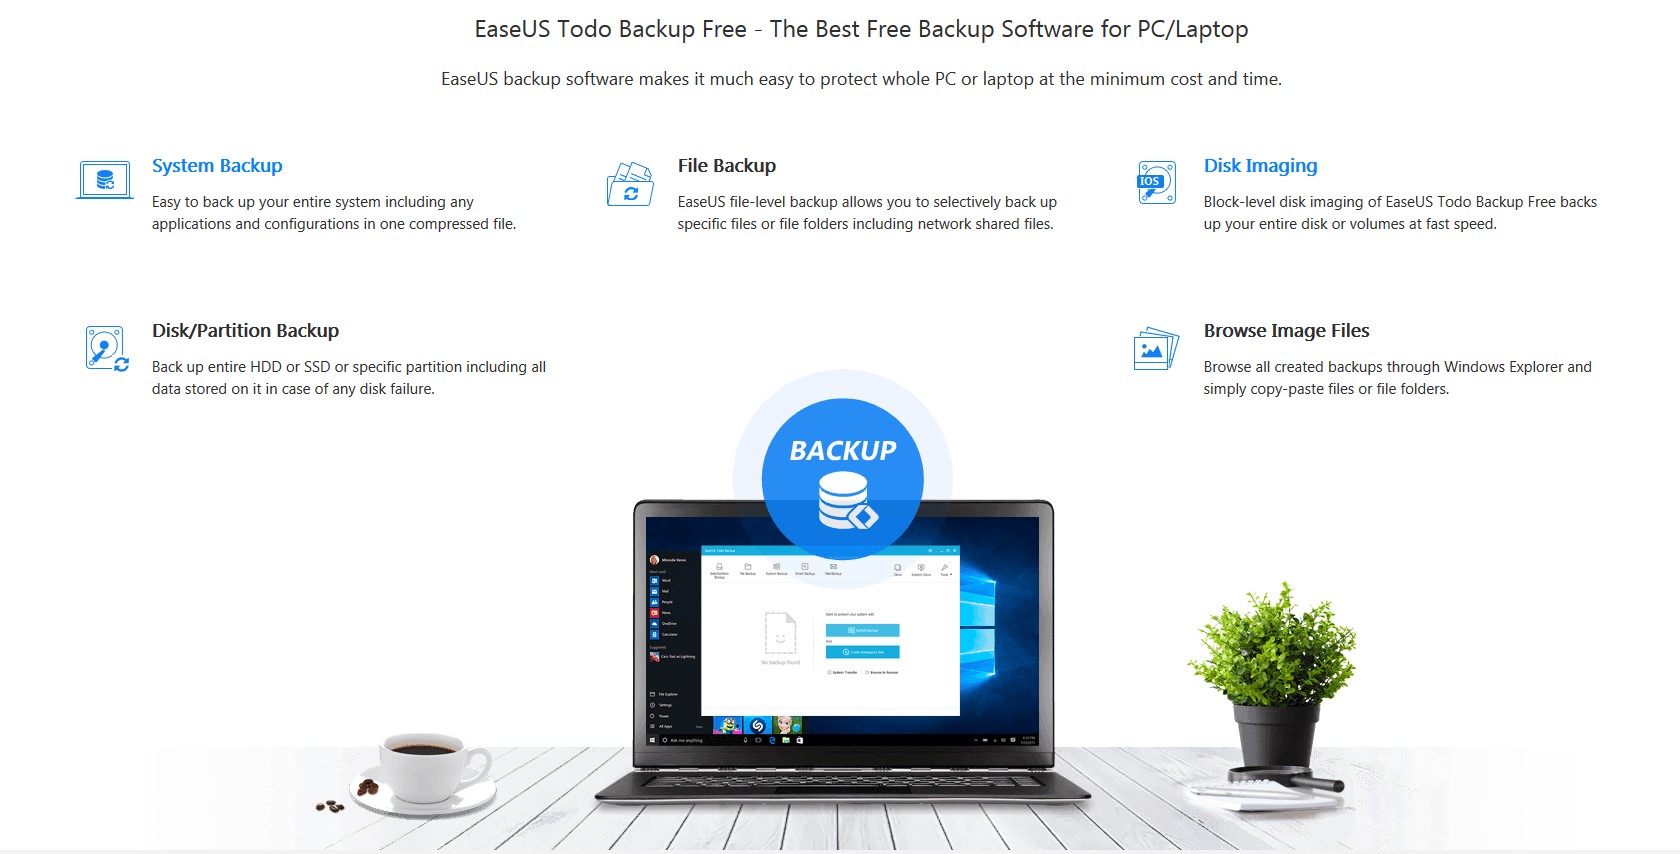 EaseUS Todo Backup Free - The Best Free Backup Software for PCLaptop